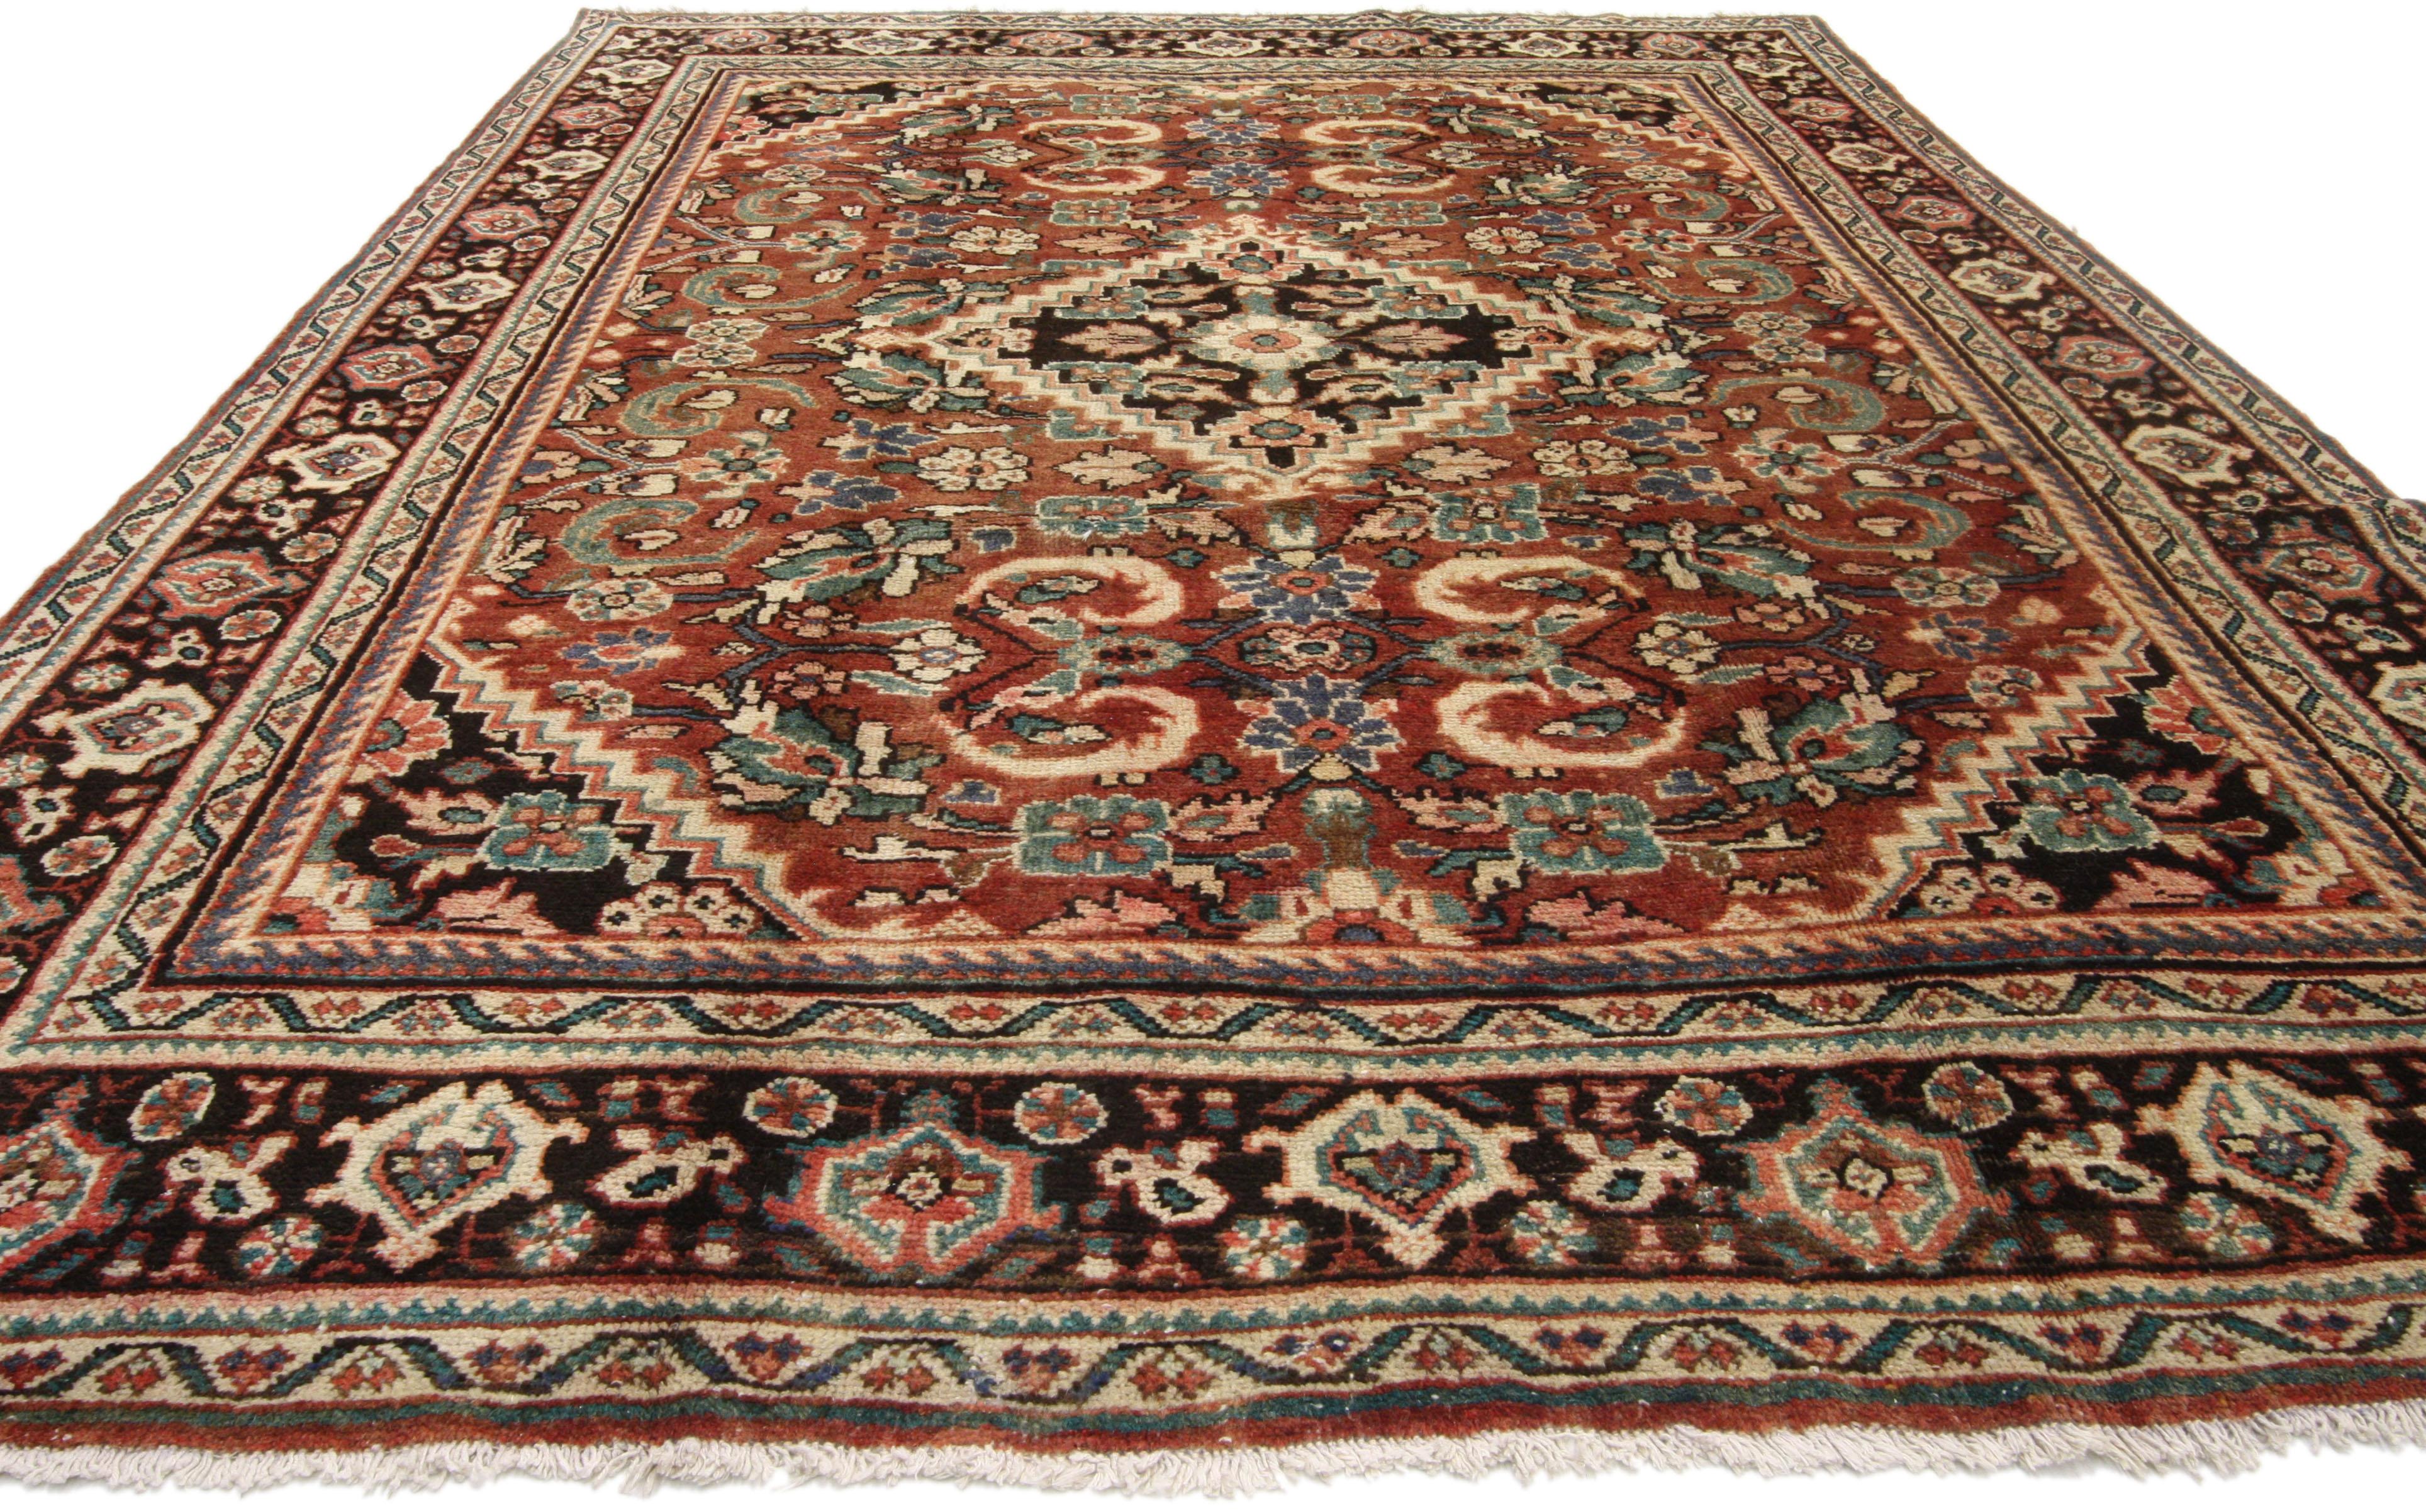 75189 Vintage Persian Mahal Area Rug with Modern Rustic Luxe Style 07'00 x 10'02. Depth and rustic beauty collide in this gorgeous hand-knotted wool vintage Persian Mahal area rug. A darkly hued stepped medallion lozenge amulet anchors an abrashed